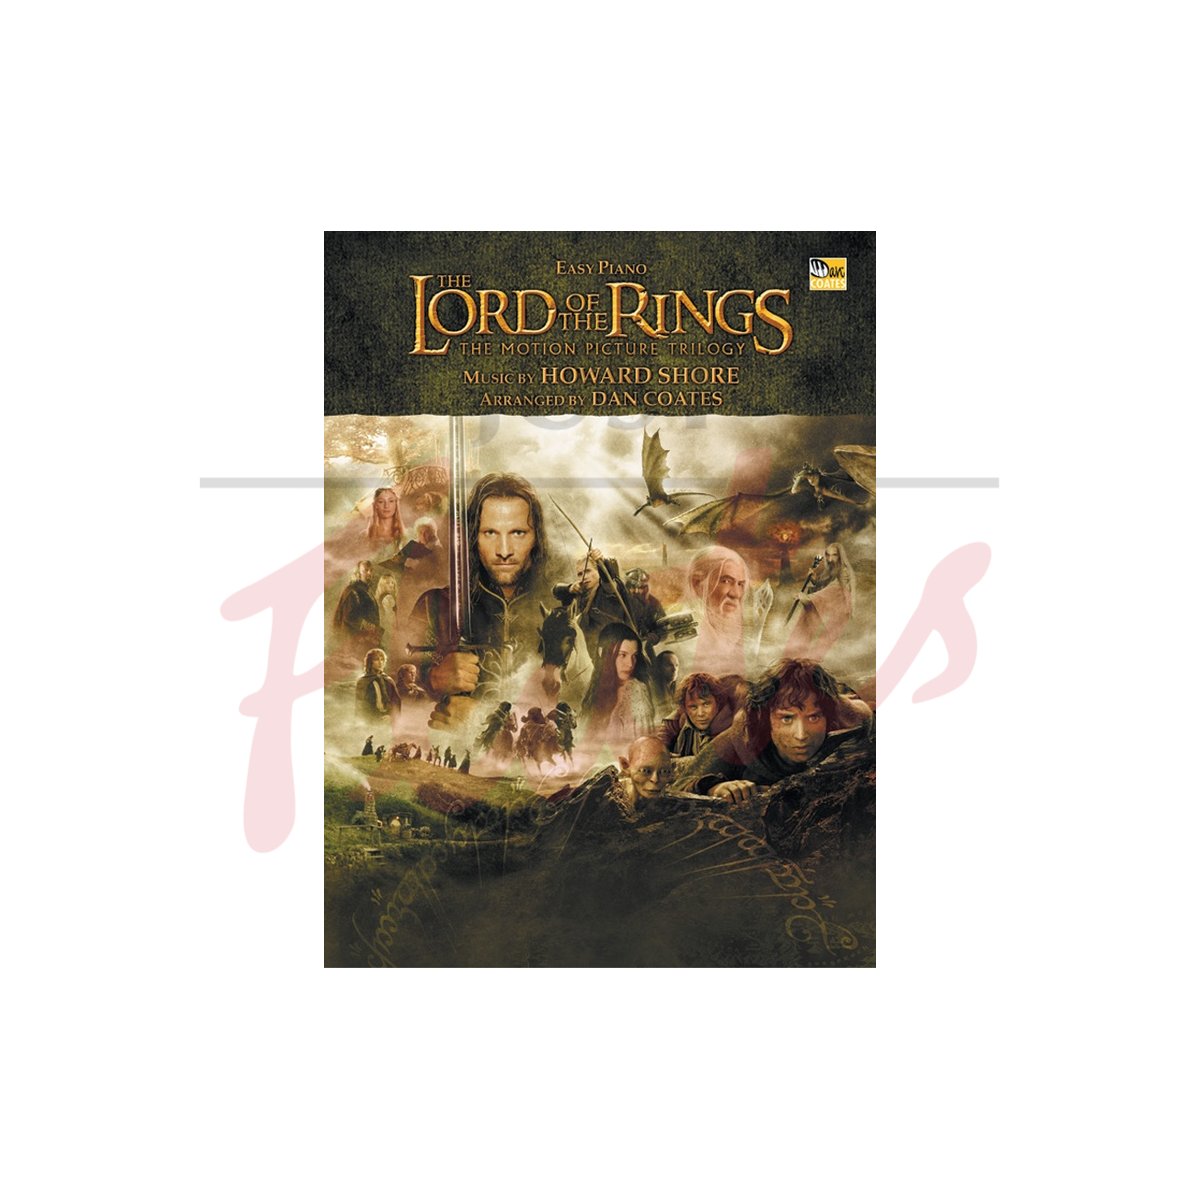 Lord Of The Rings Trilogy [Easy Piano]